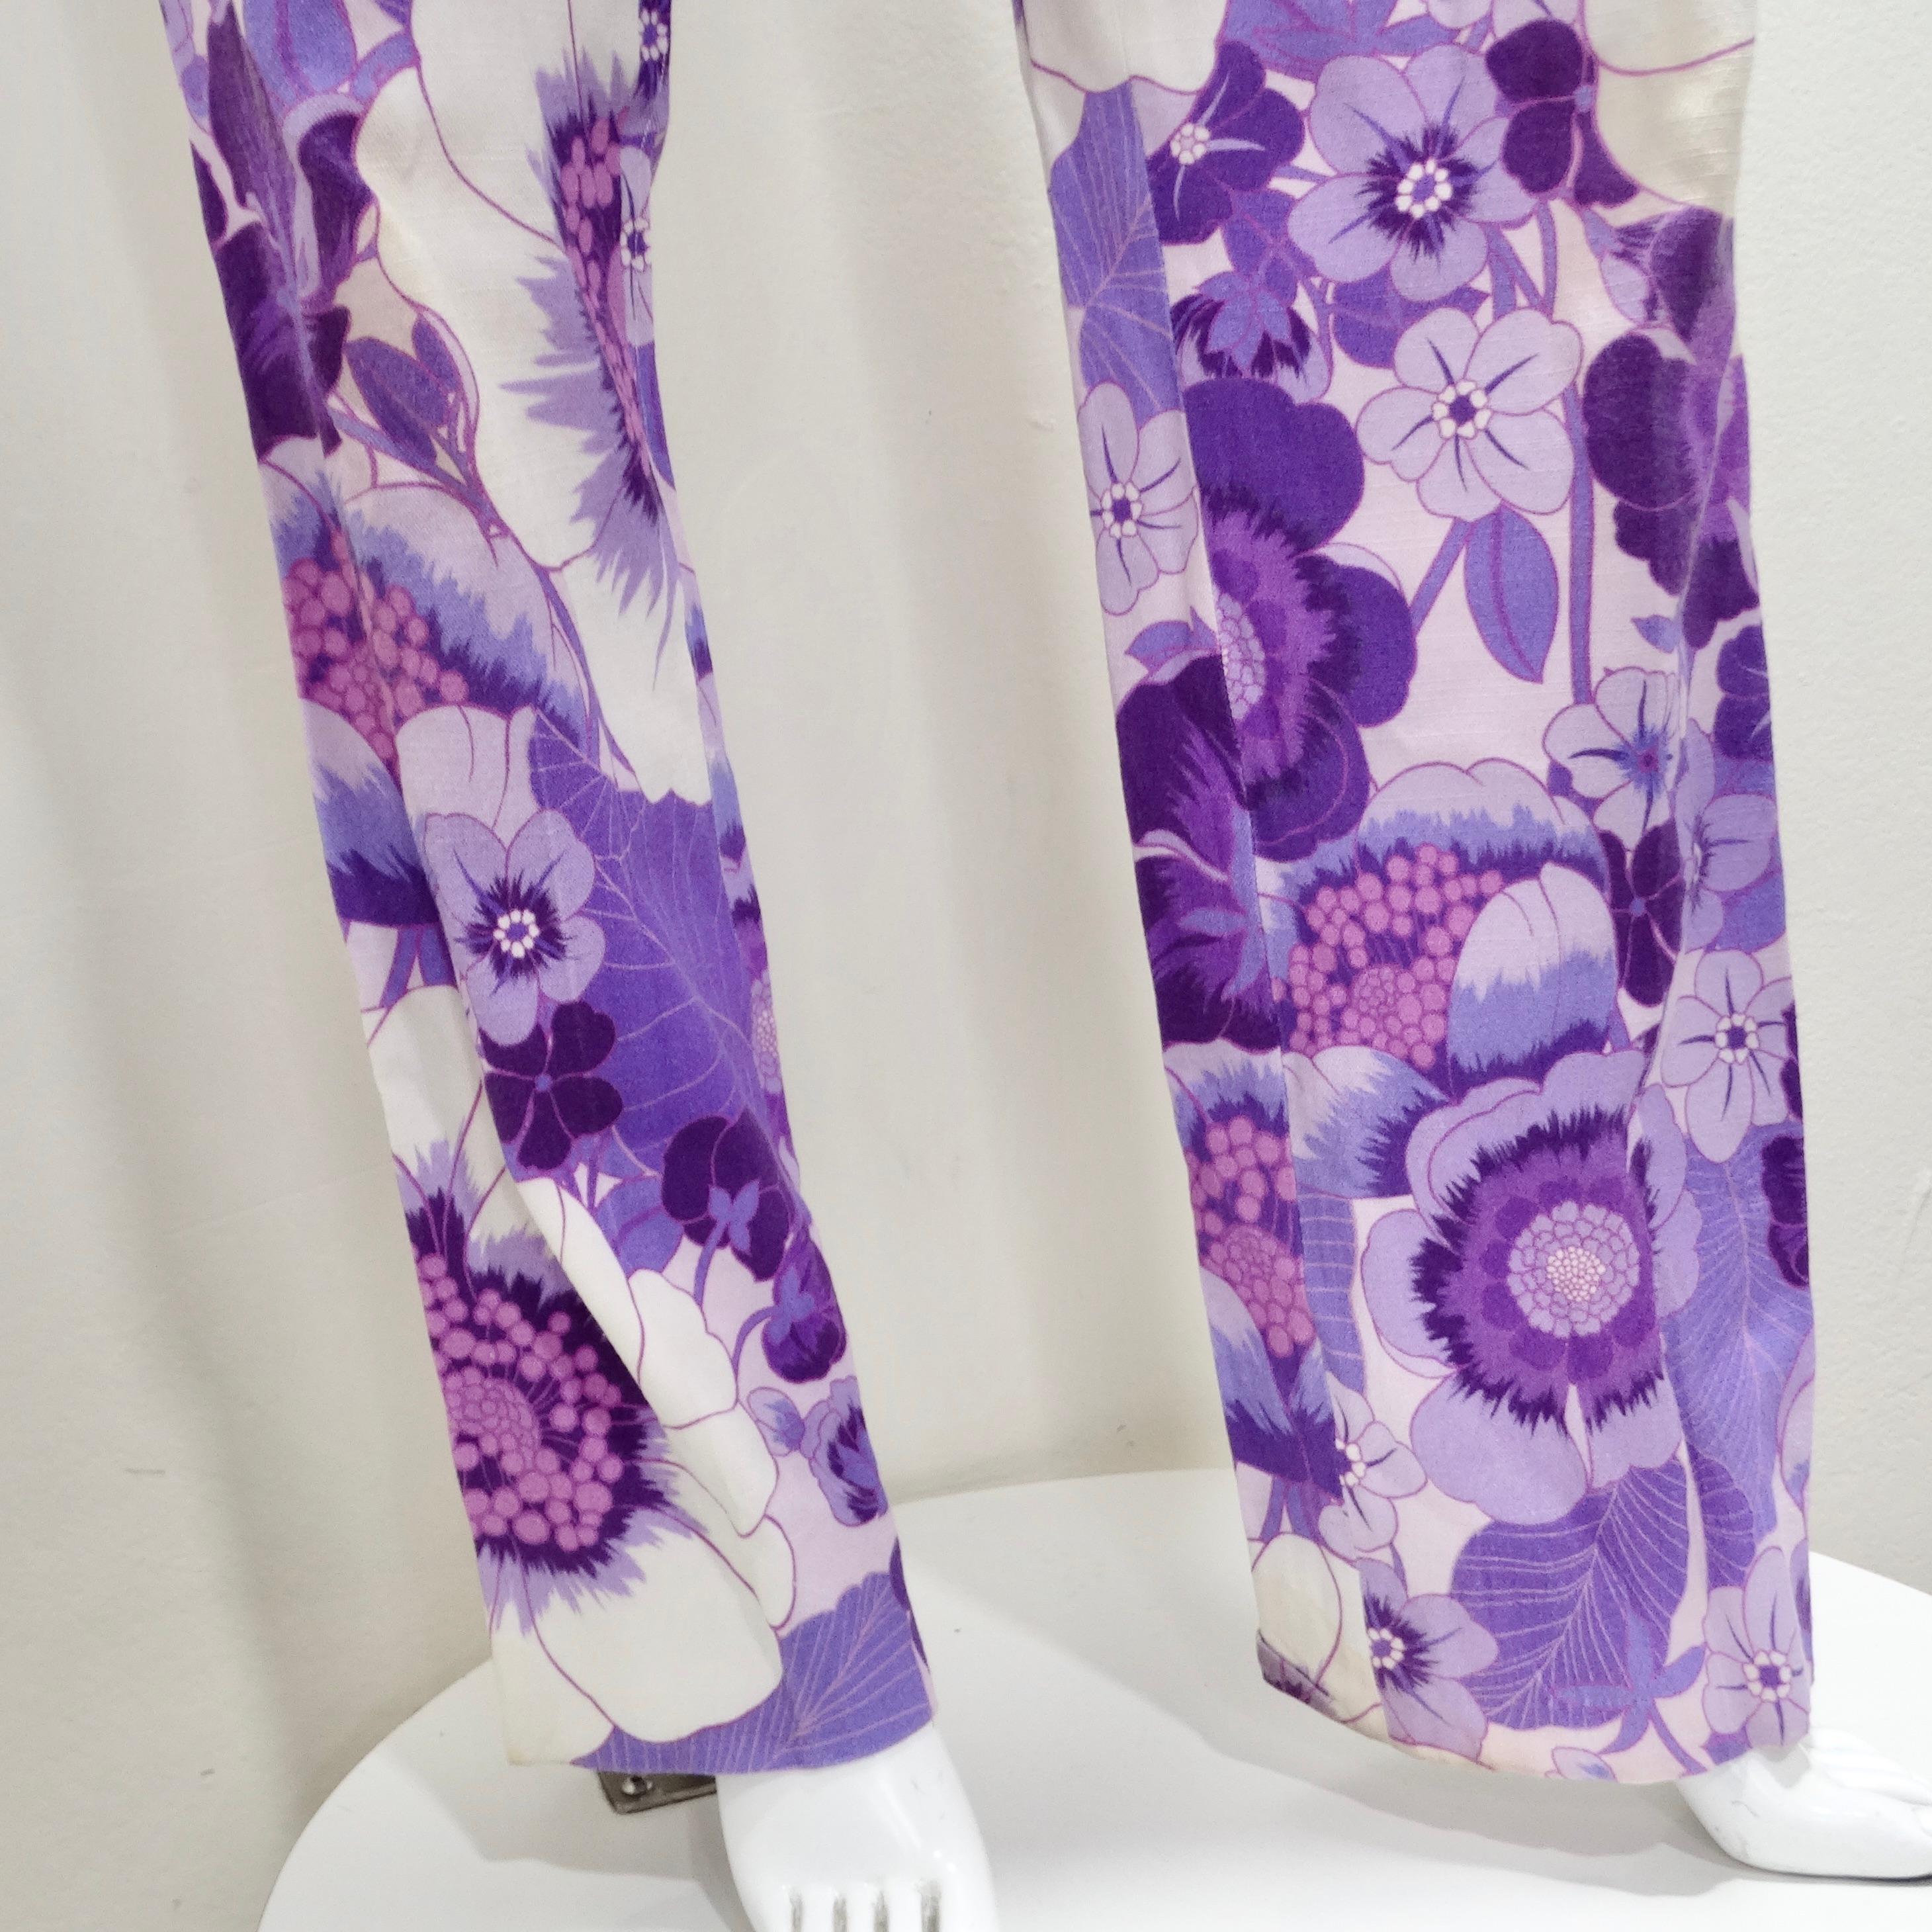 Tom Ford Spring 2021 Purple Floral Print Trousers In Good Condition For Sale In Scottsdale, AZ